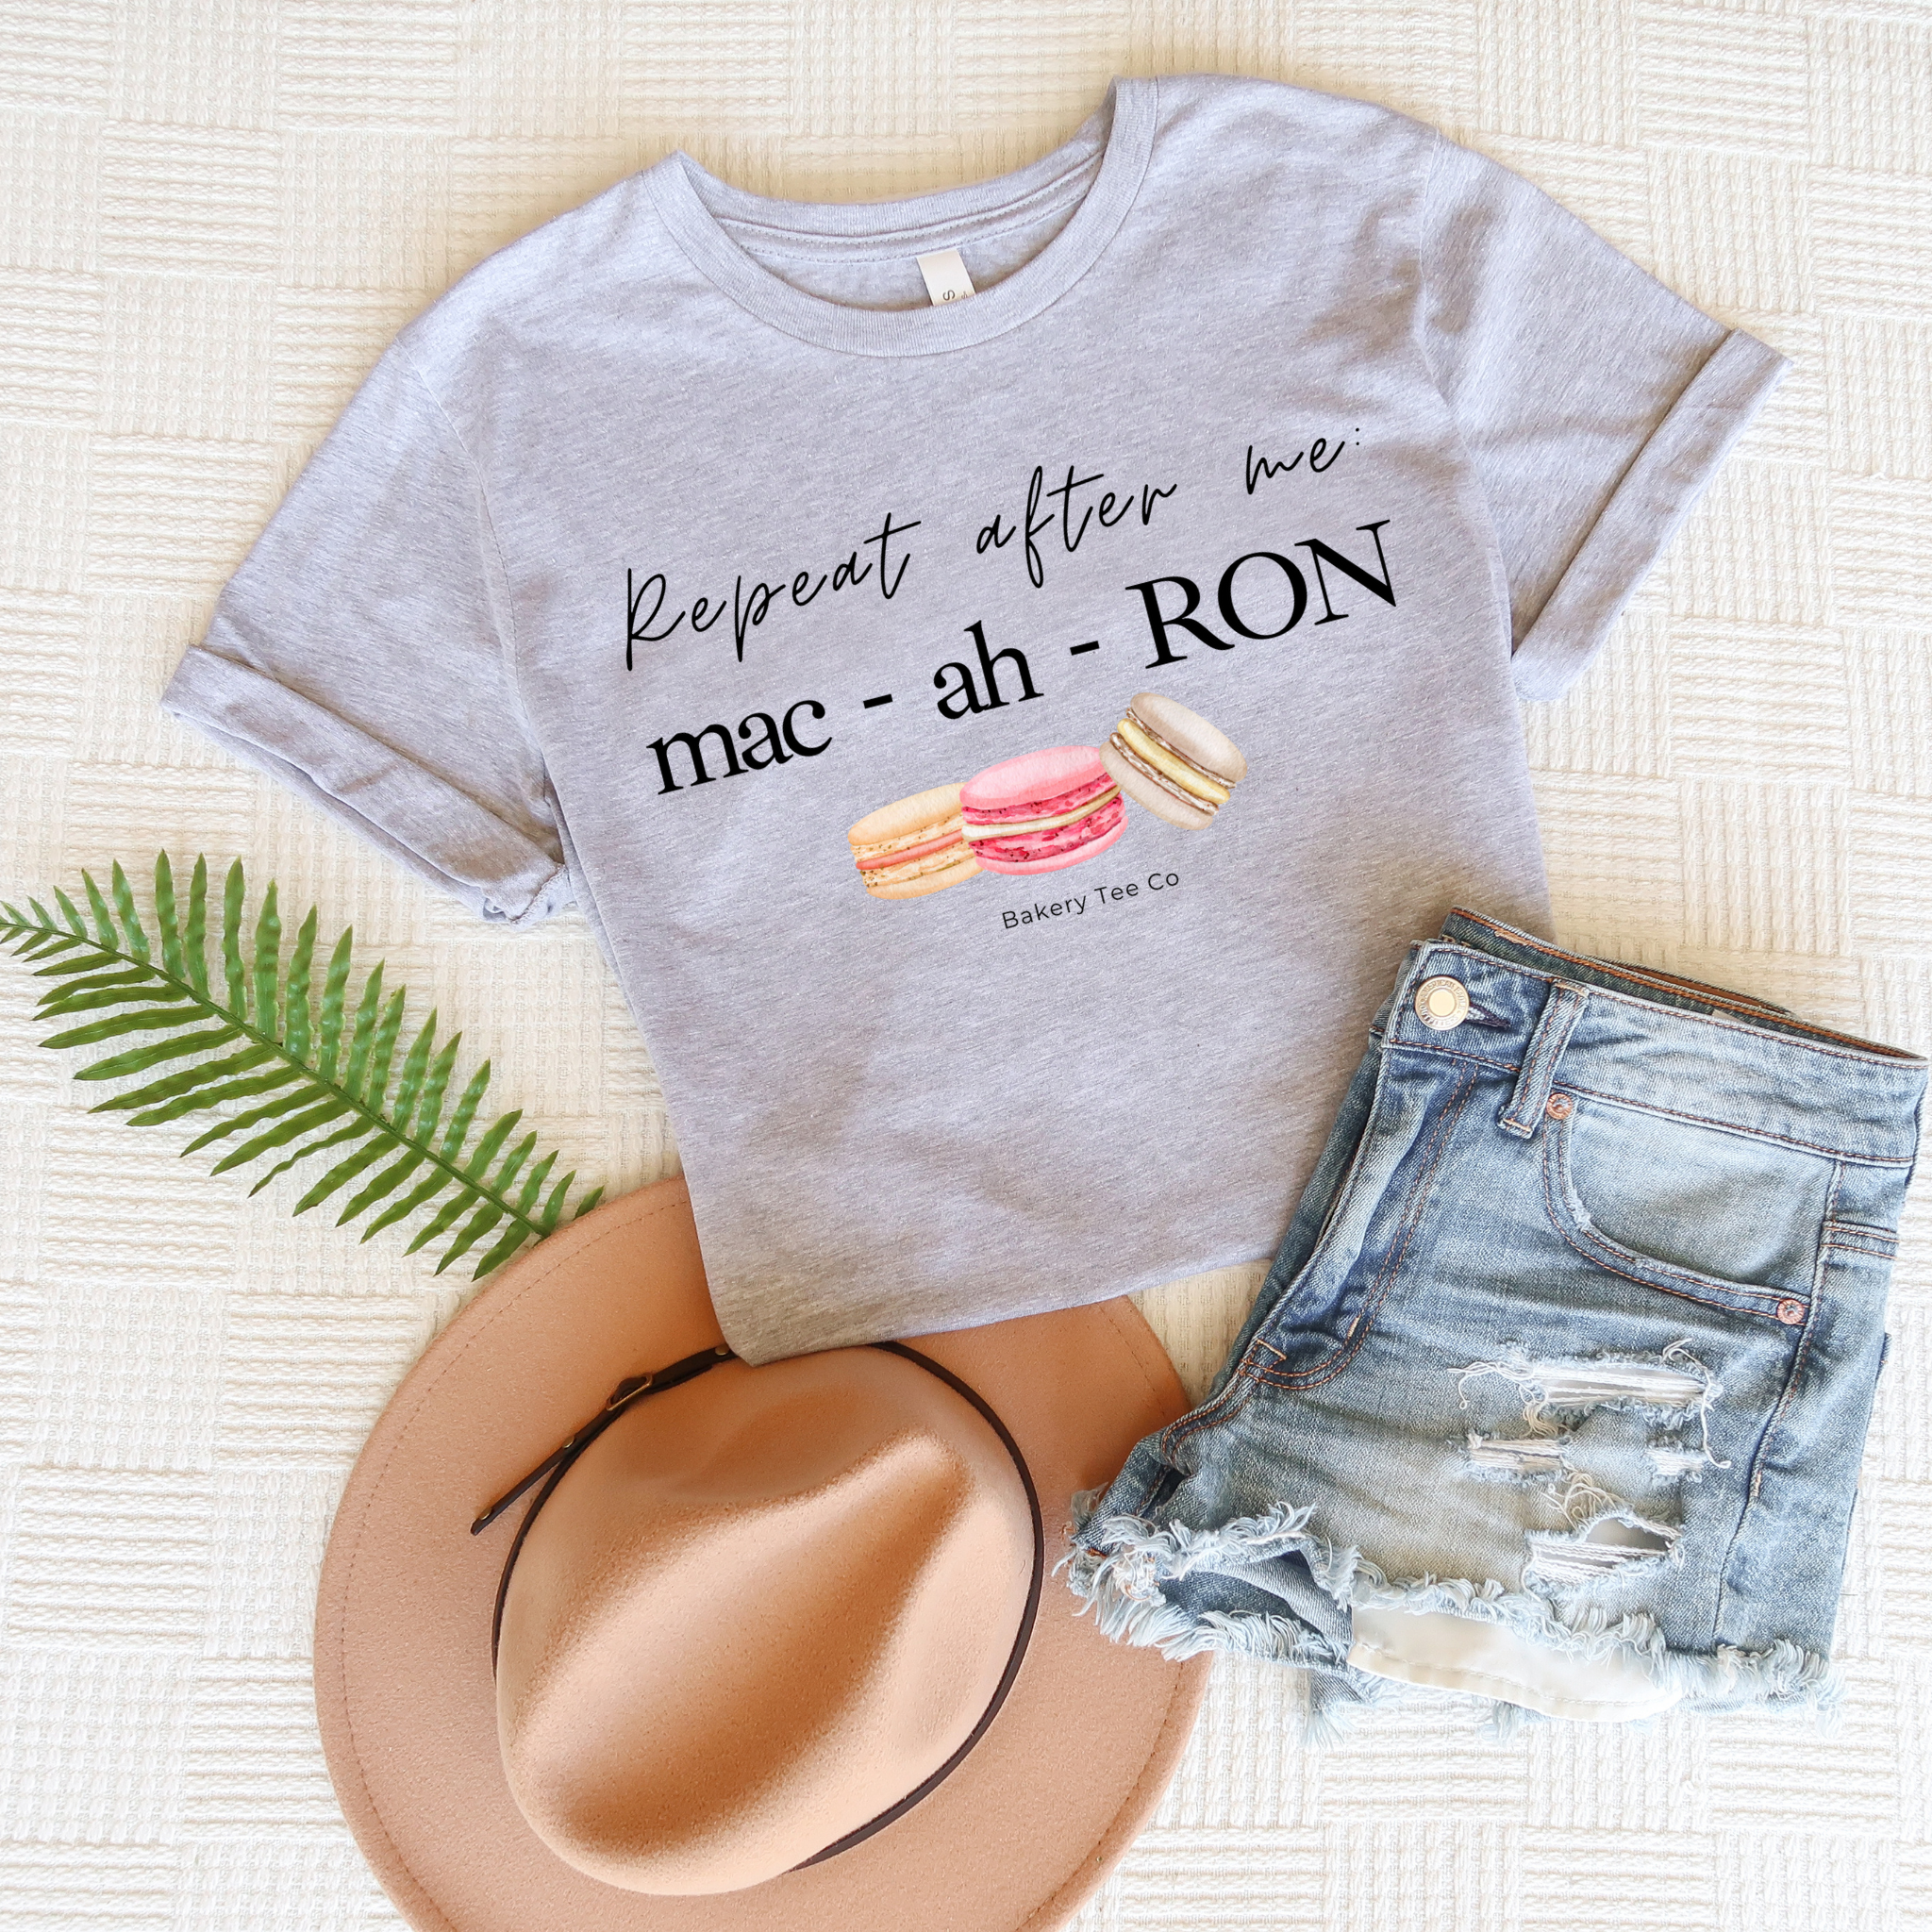 Repeat after me: mac-ah-RON (multiple colors)